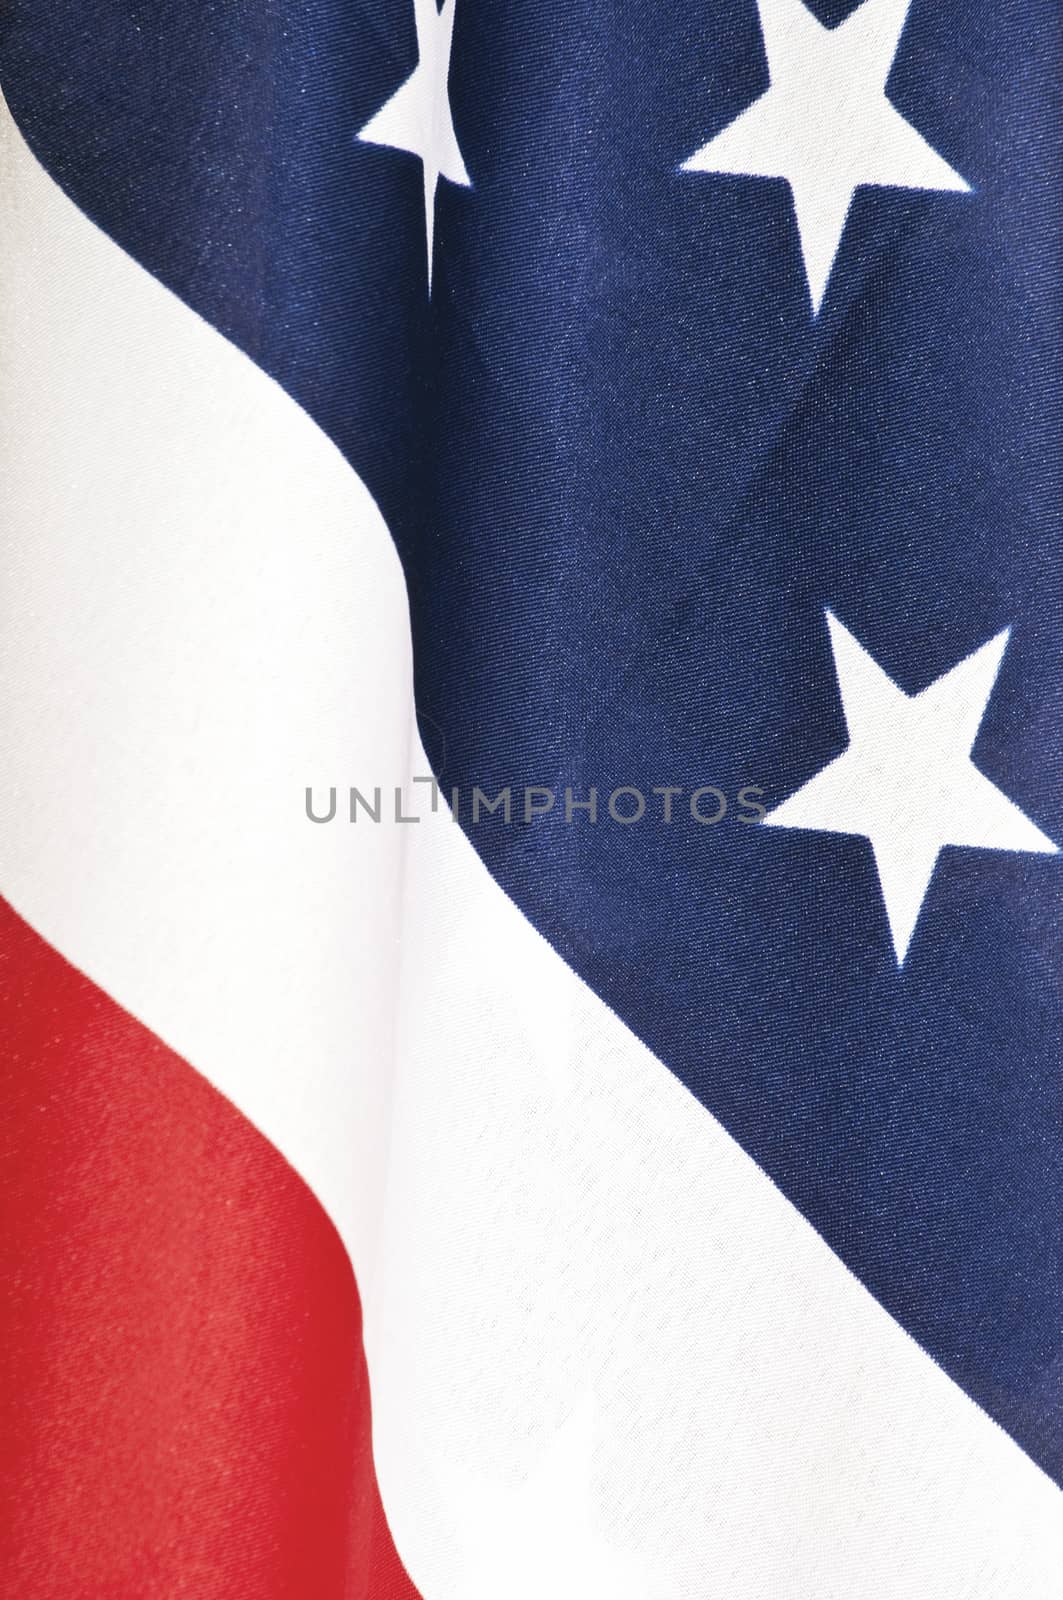 Closeup of an American flag showing the red, white and blue with some of the stars.